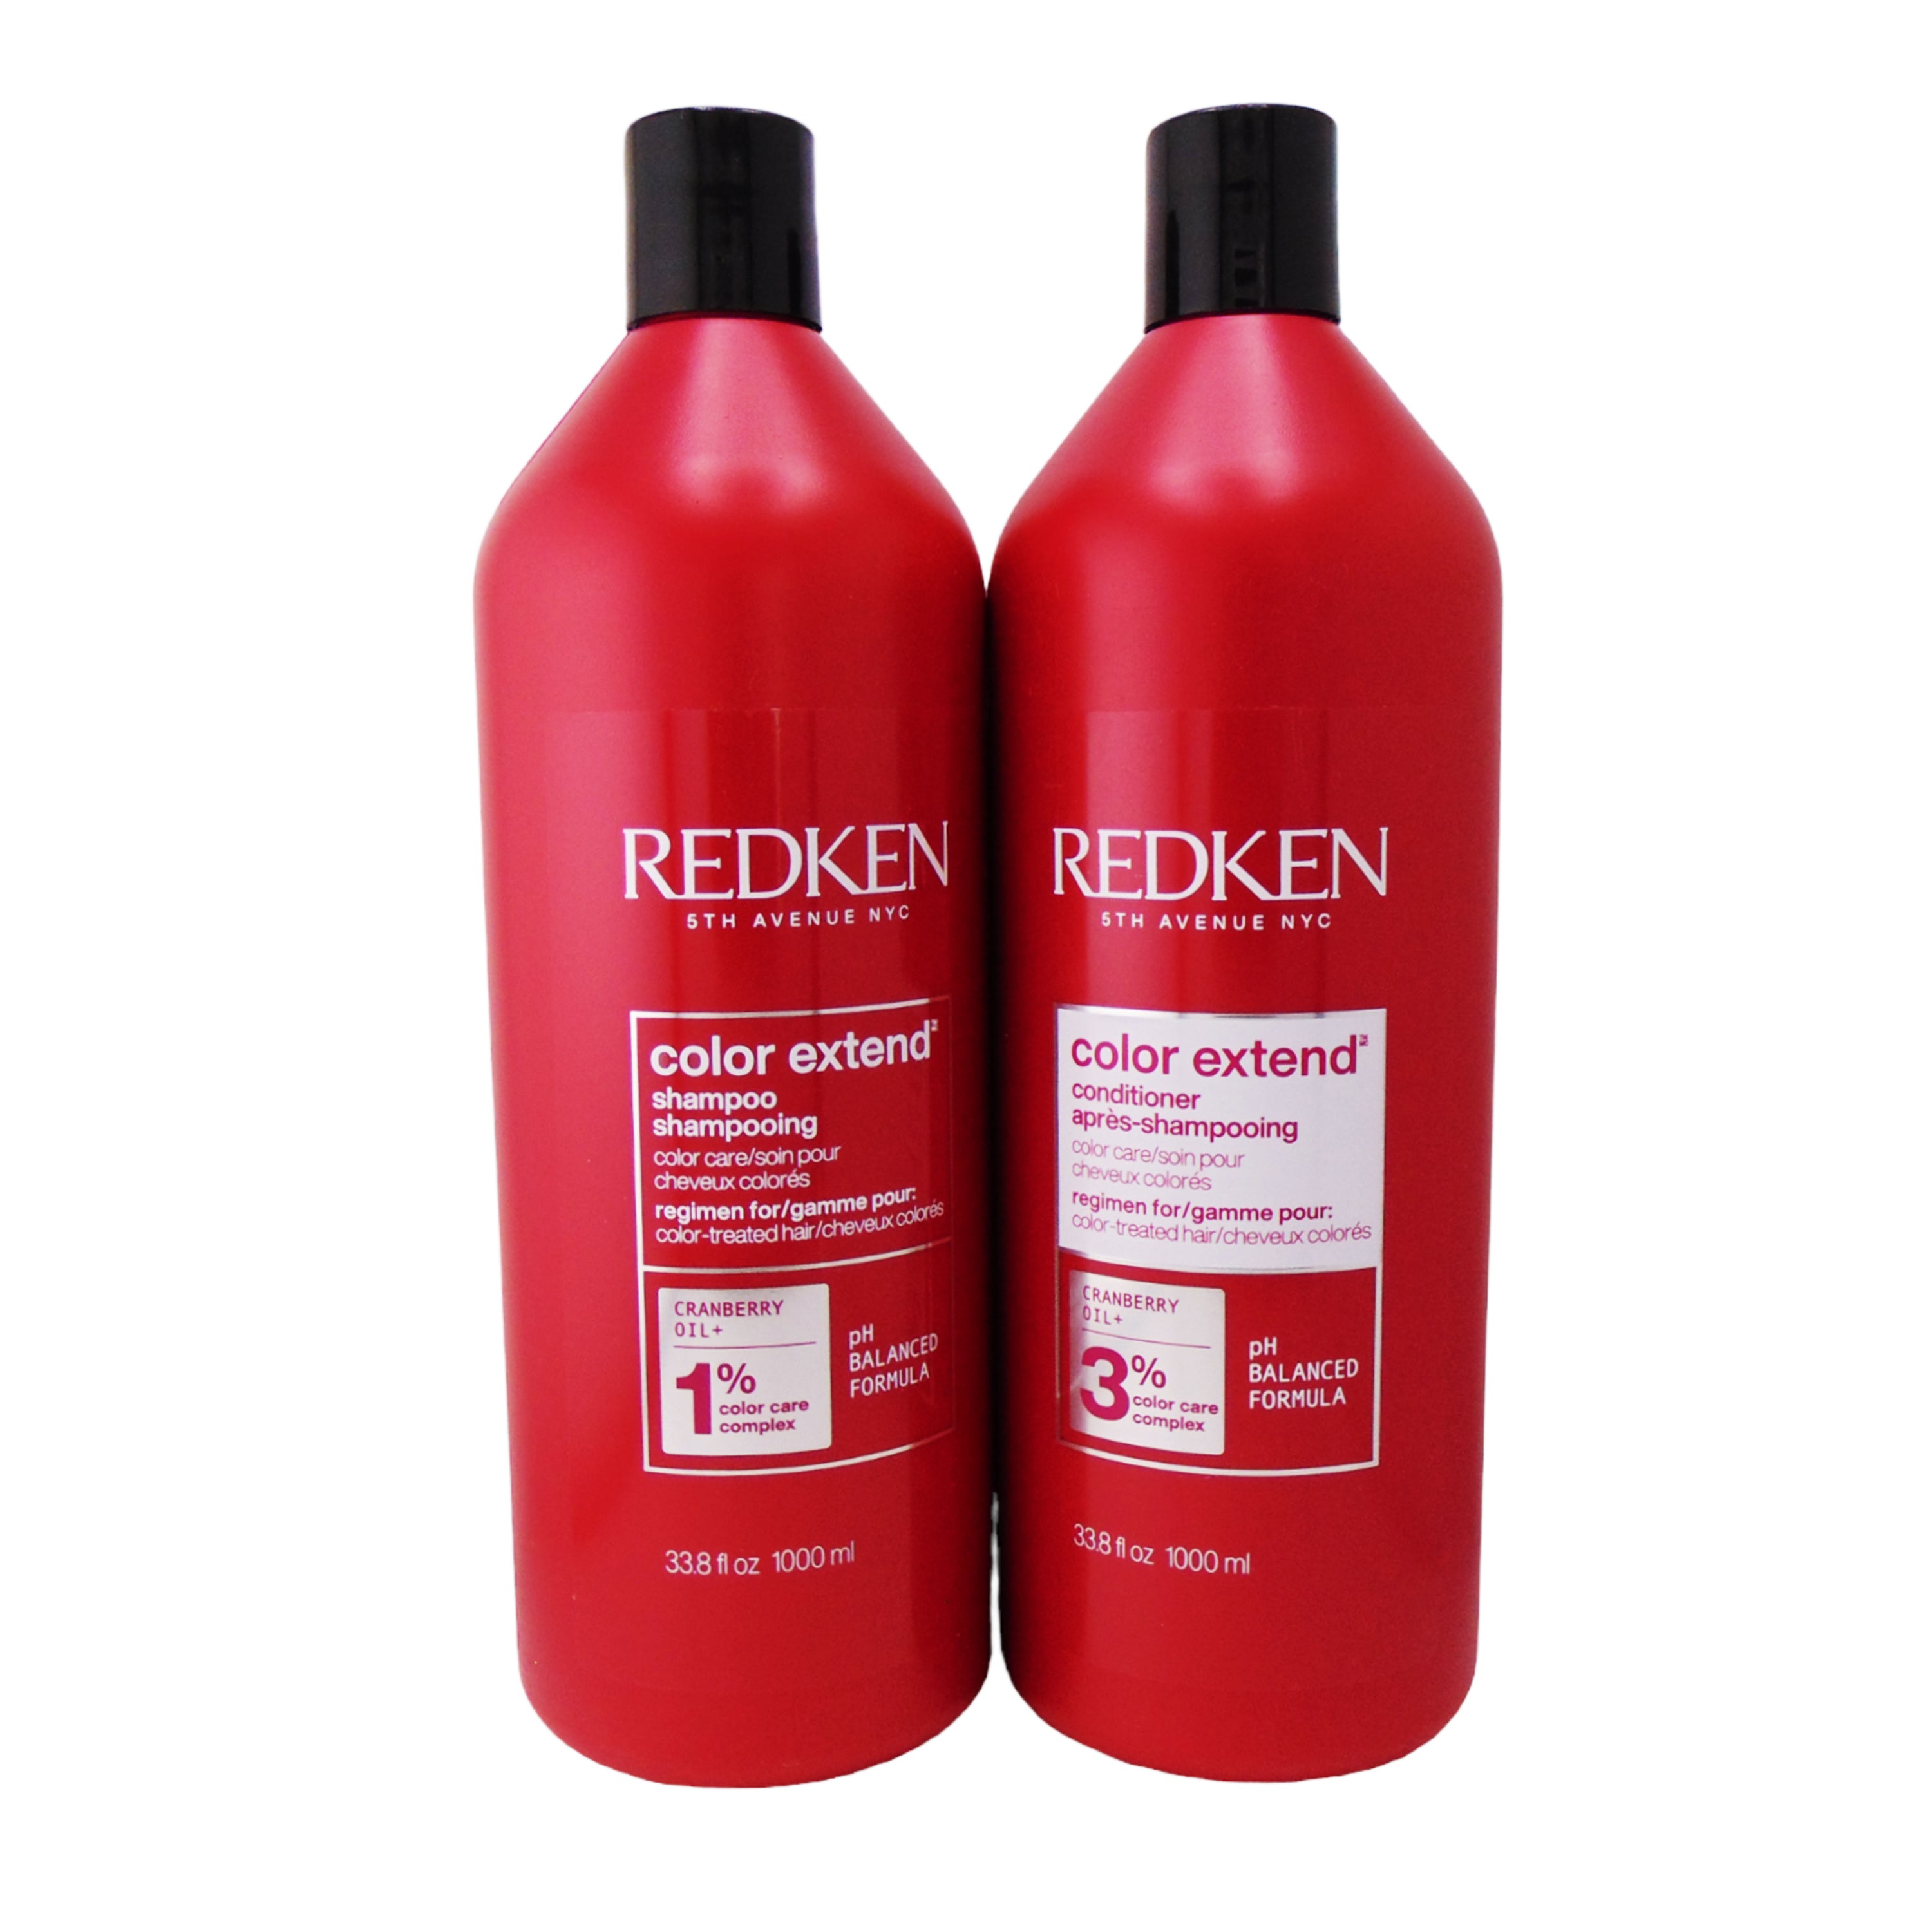 Redken Color Extend Duo (Shampoo and Conditioner)